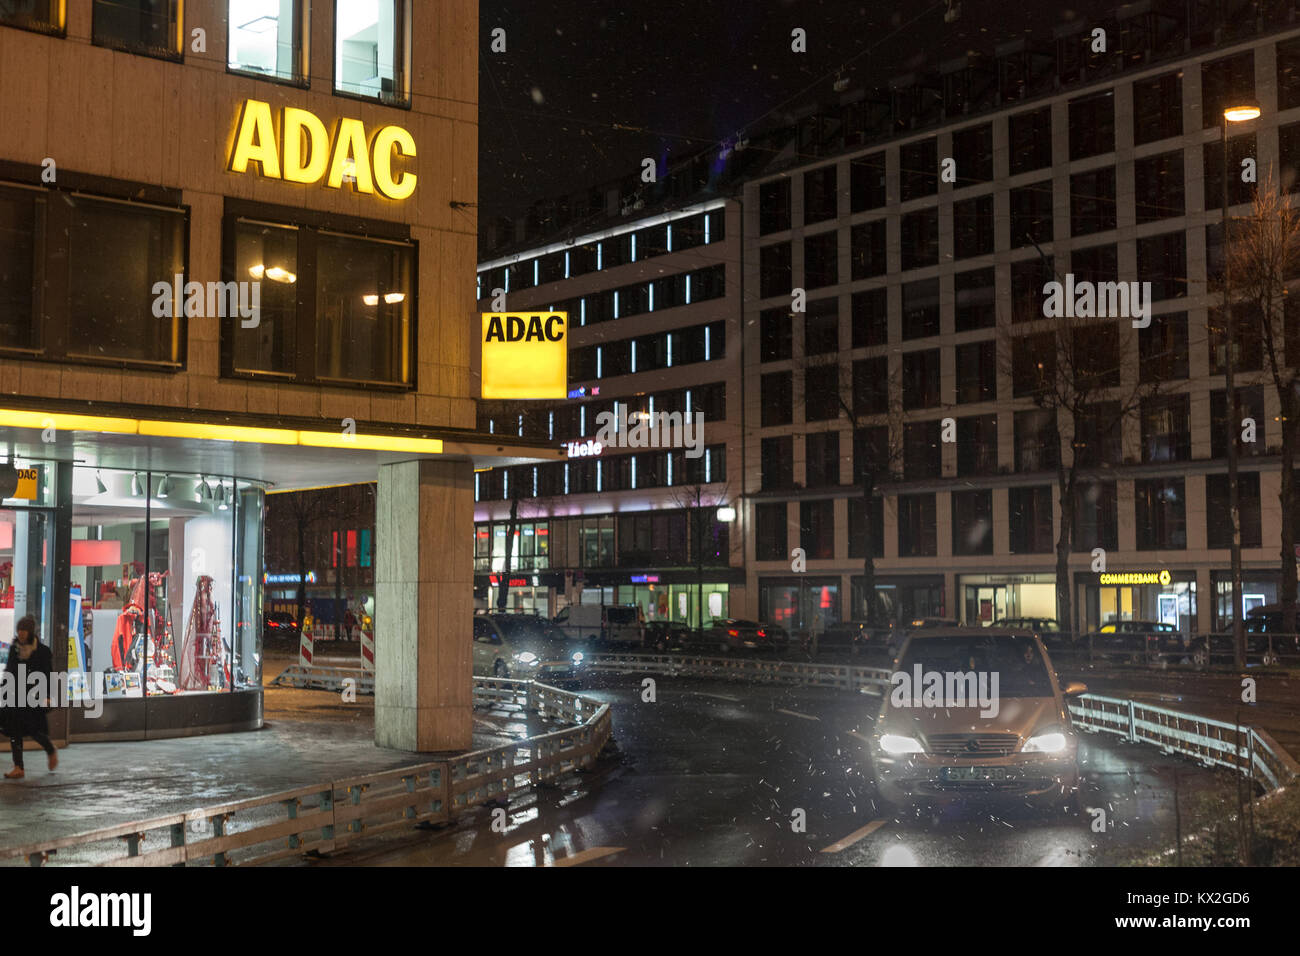 MUNICH, GERMANY - DECEMBER 17, 2017: ADAC logo on their downtown Munich main office taken during a snowy night. The ADAC is the main Automobile club i Stock Photo